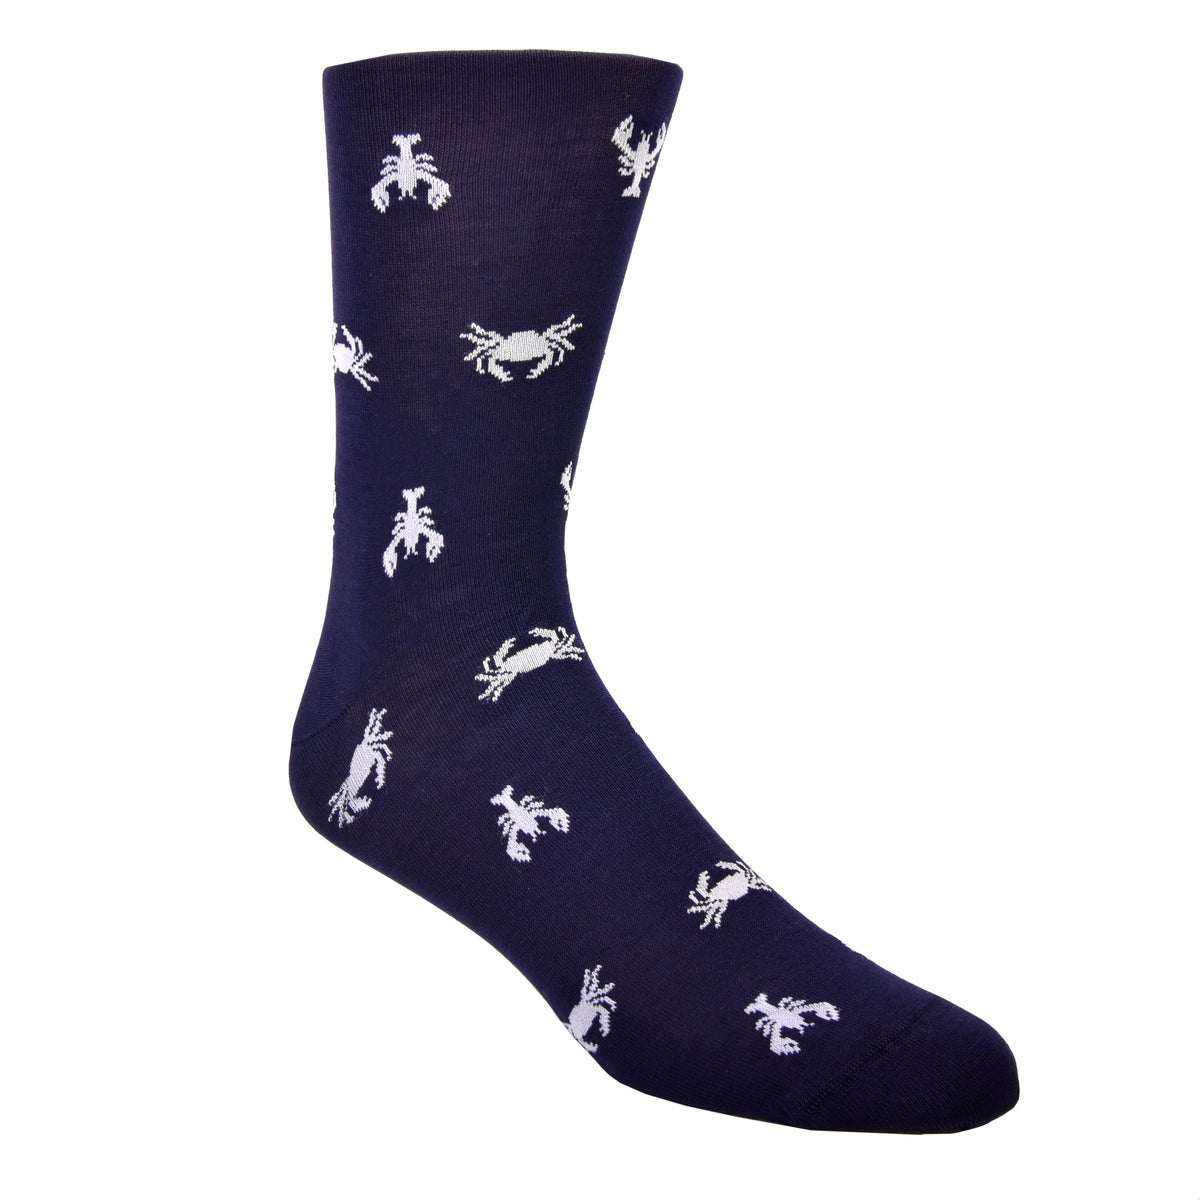 Spice up your sock game with our favorite crustaceans. Life is too short to wear boring socks! #damnright  70% Mercerized Cotton 29% Nylon 1% Spandex Fits Size 8-12 Machine Washable Made in the USA